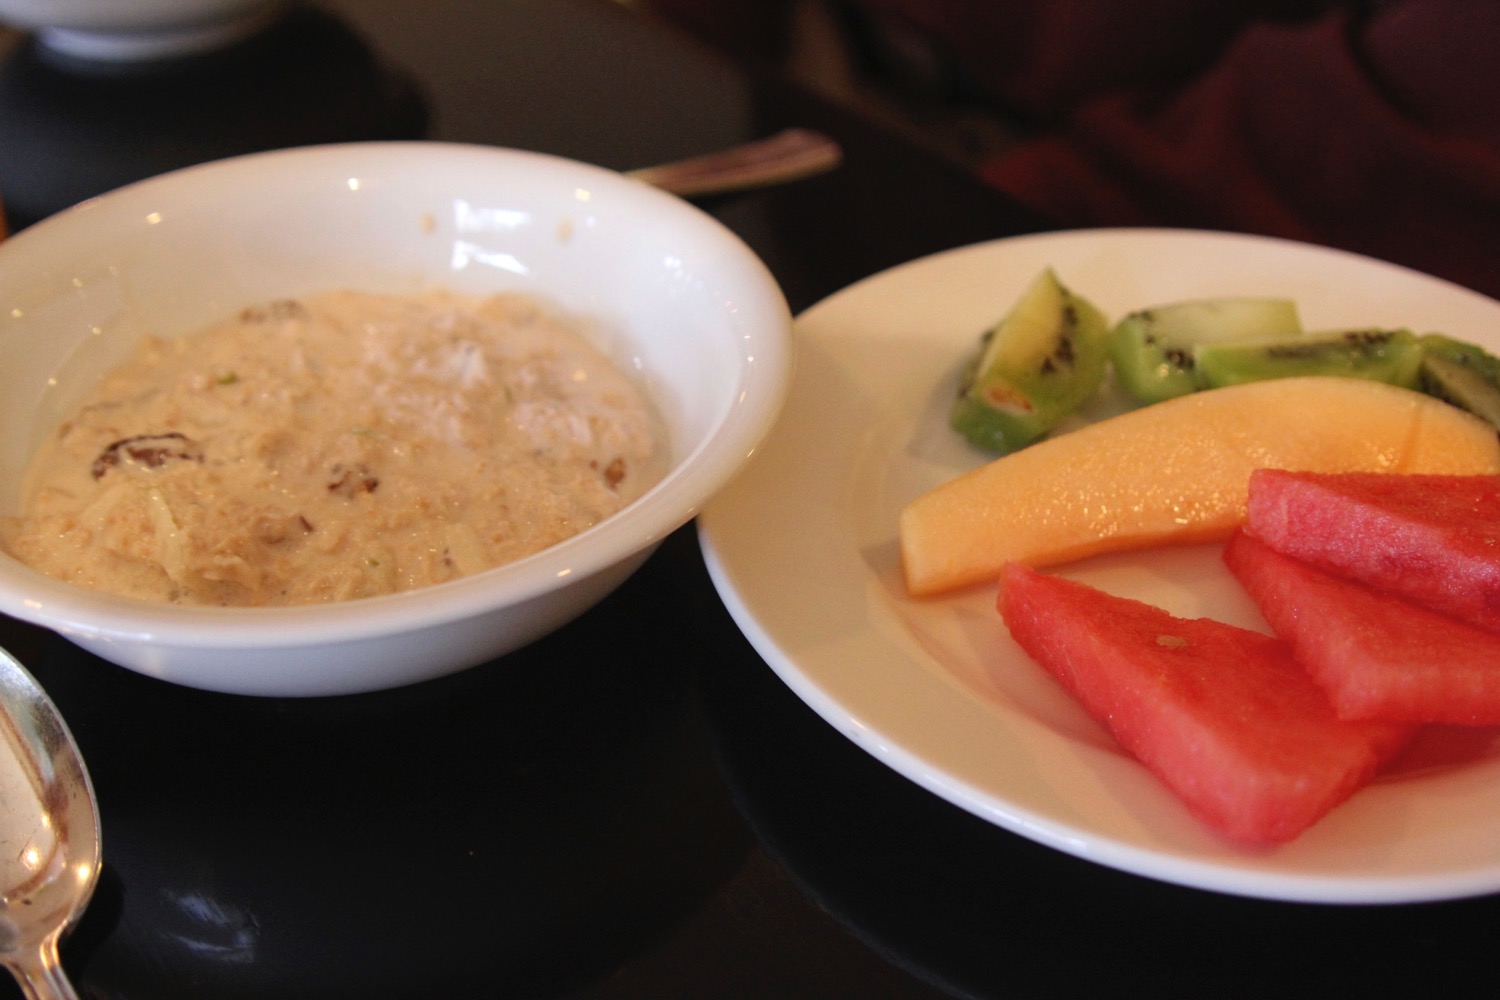 a bowl of oatmeal and fruit on a plate